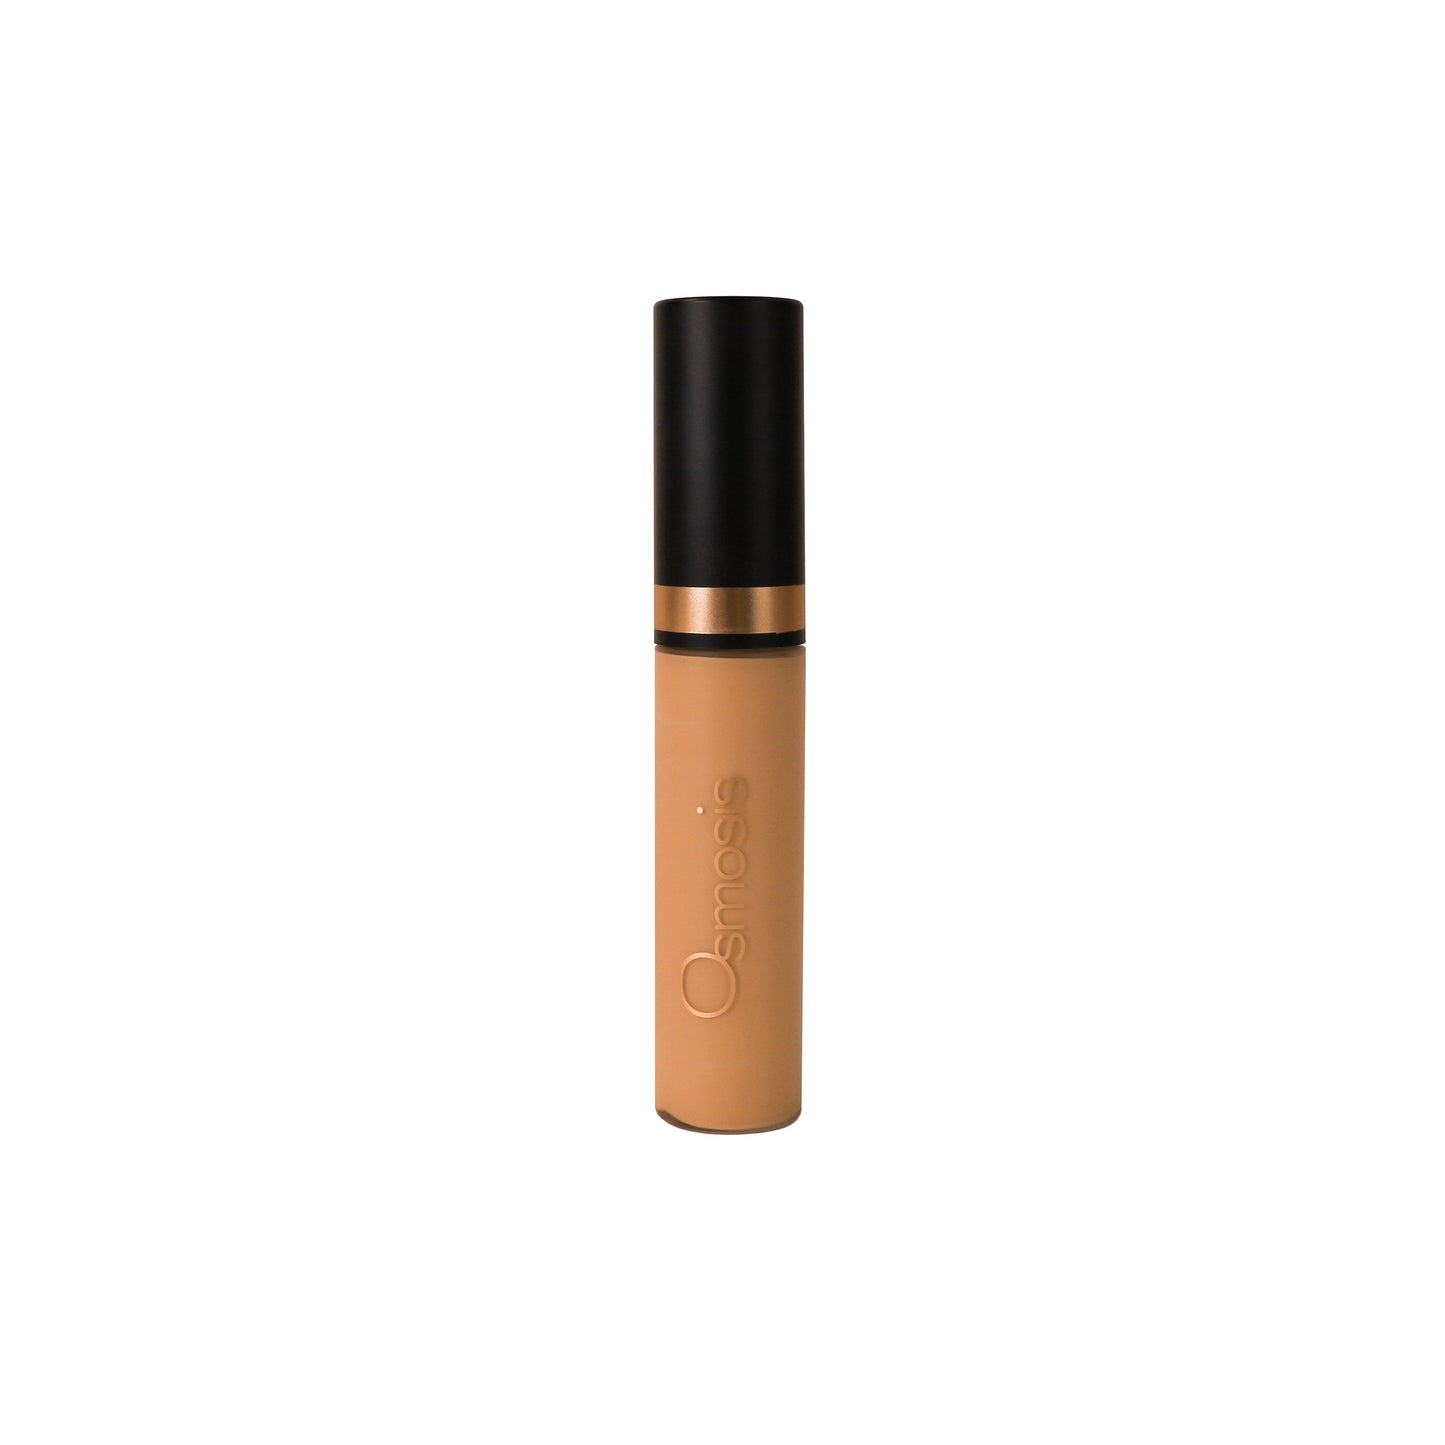 Flawless concealer Sienna shade closed - Osmosis Beauty